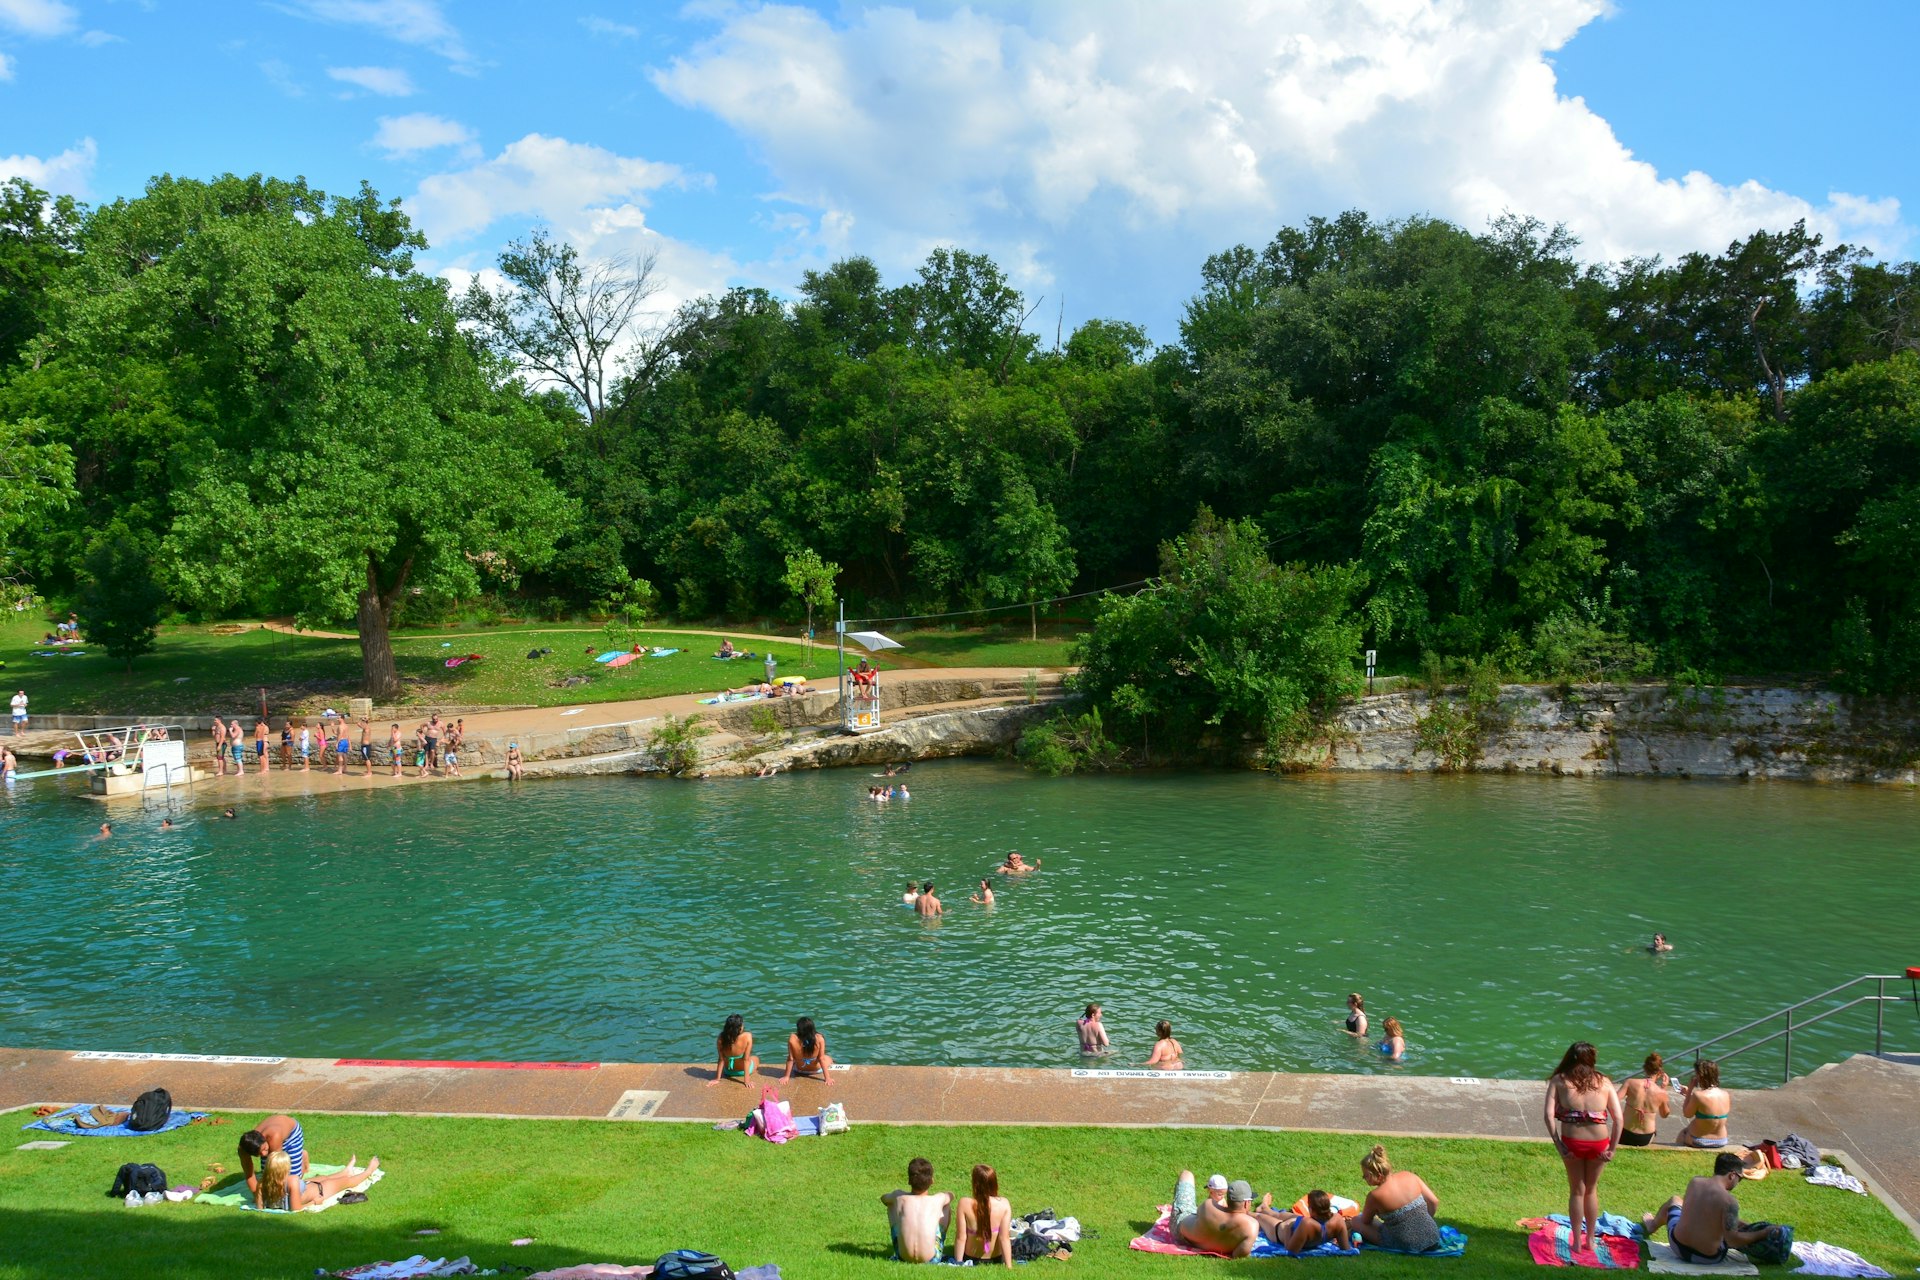 People playing in the water at Barton Springs Pool in Zilker Park, Austin